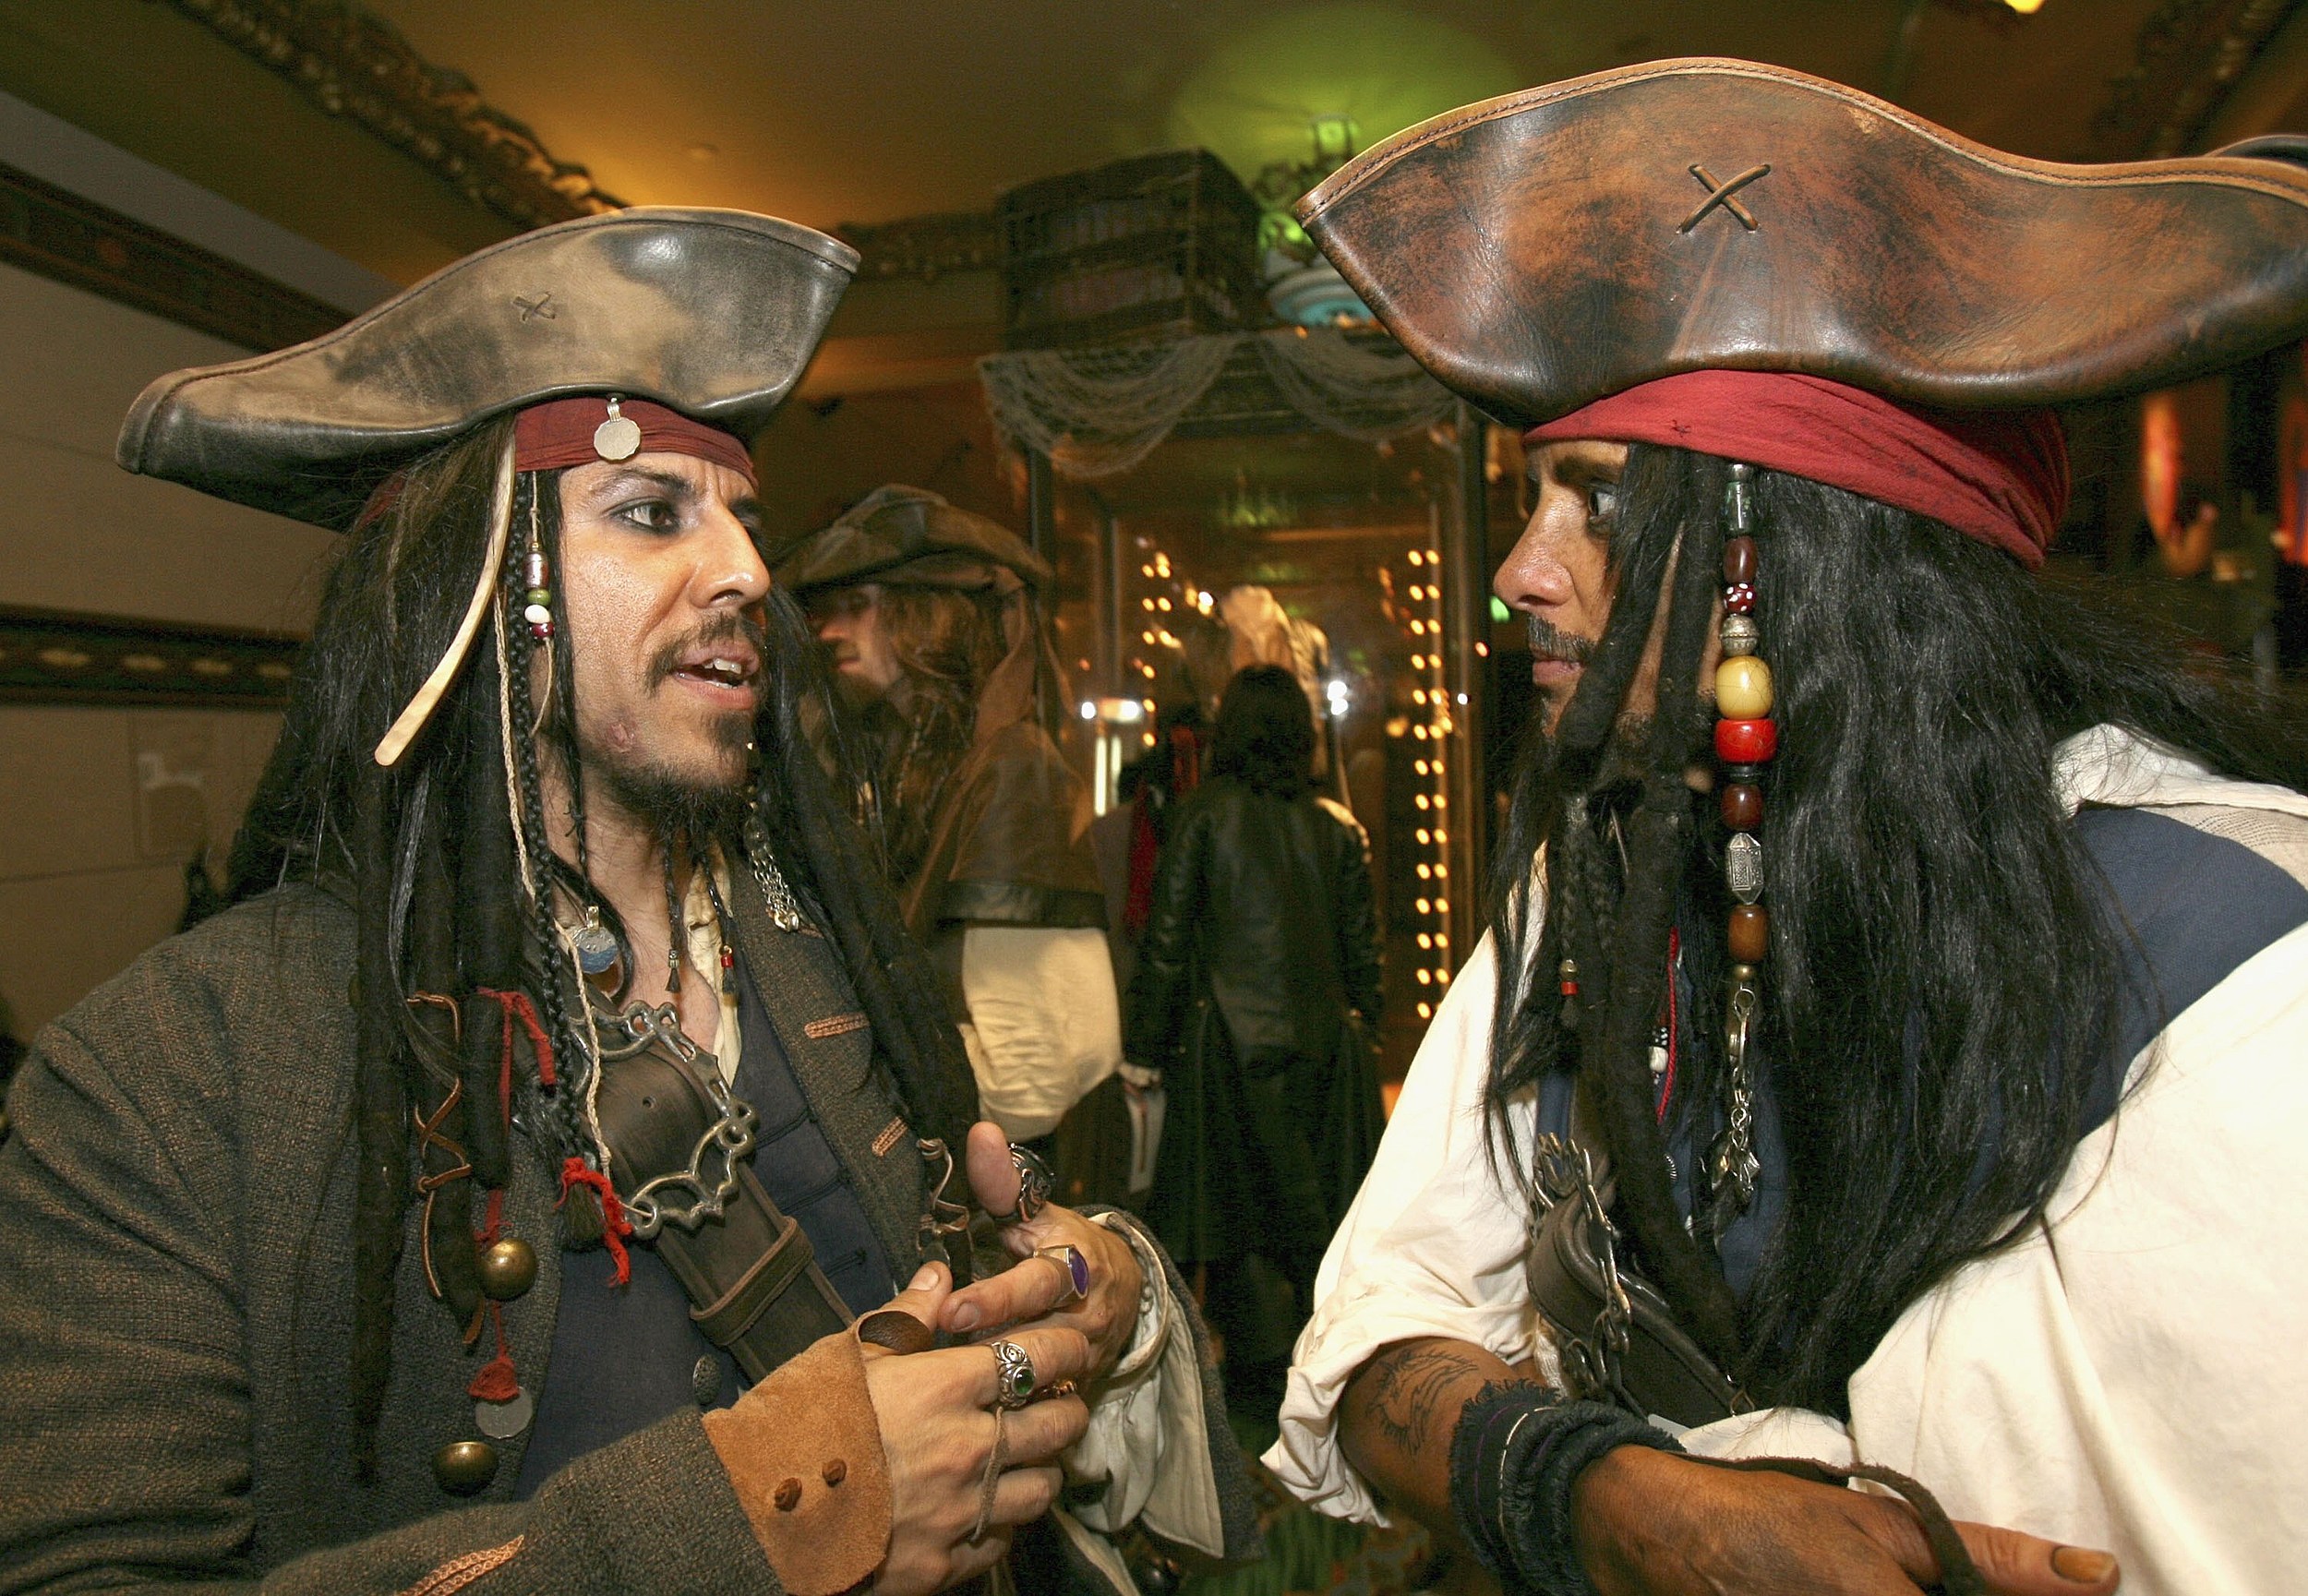 'Pirates of the Caribbean: Dead Man's Chest' Midnight Screening at the El Capitan